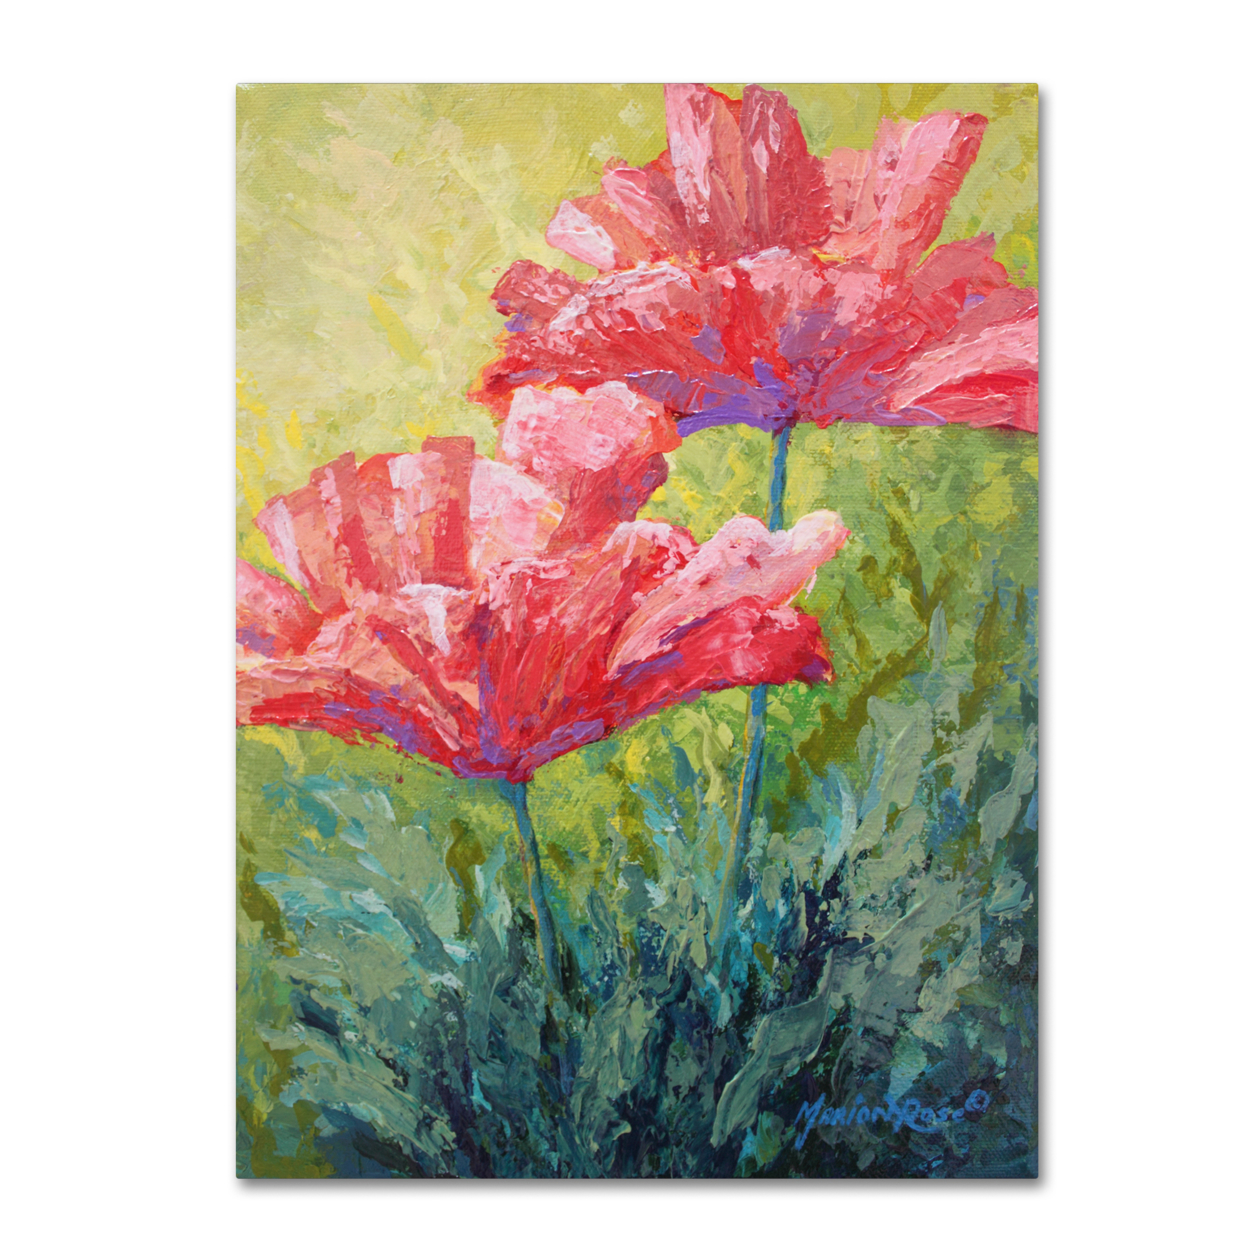 Marion Rose 'Two Red Poppies ' Ready To Hang Canvas Art 24 X 32 Inches Made In USA